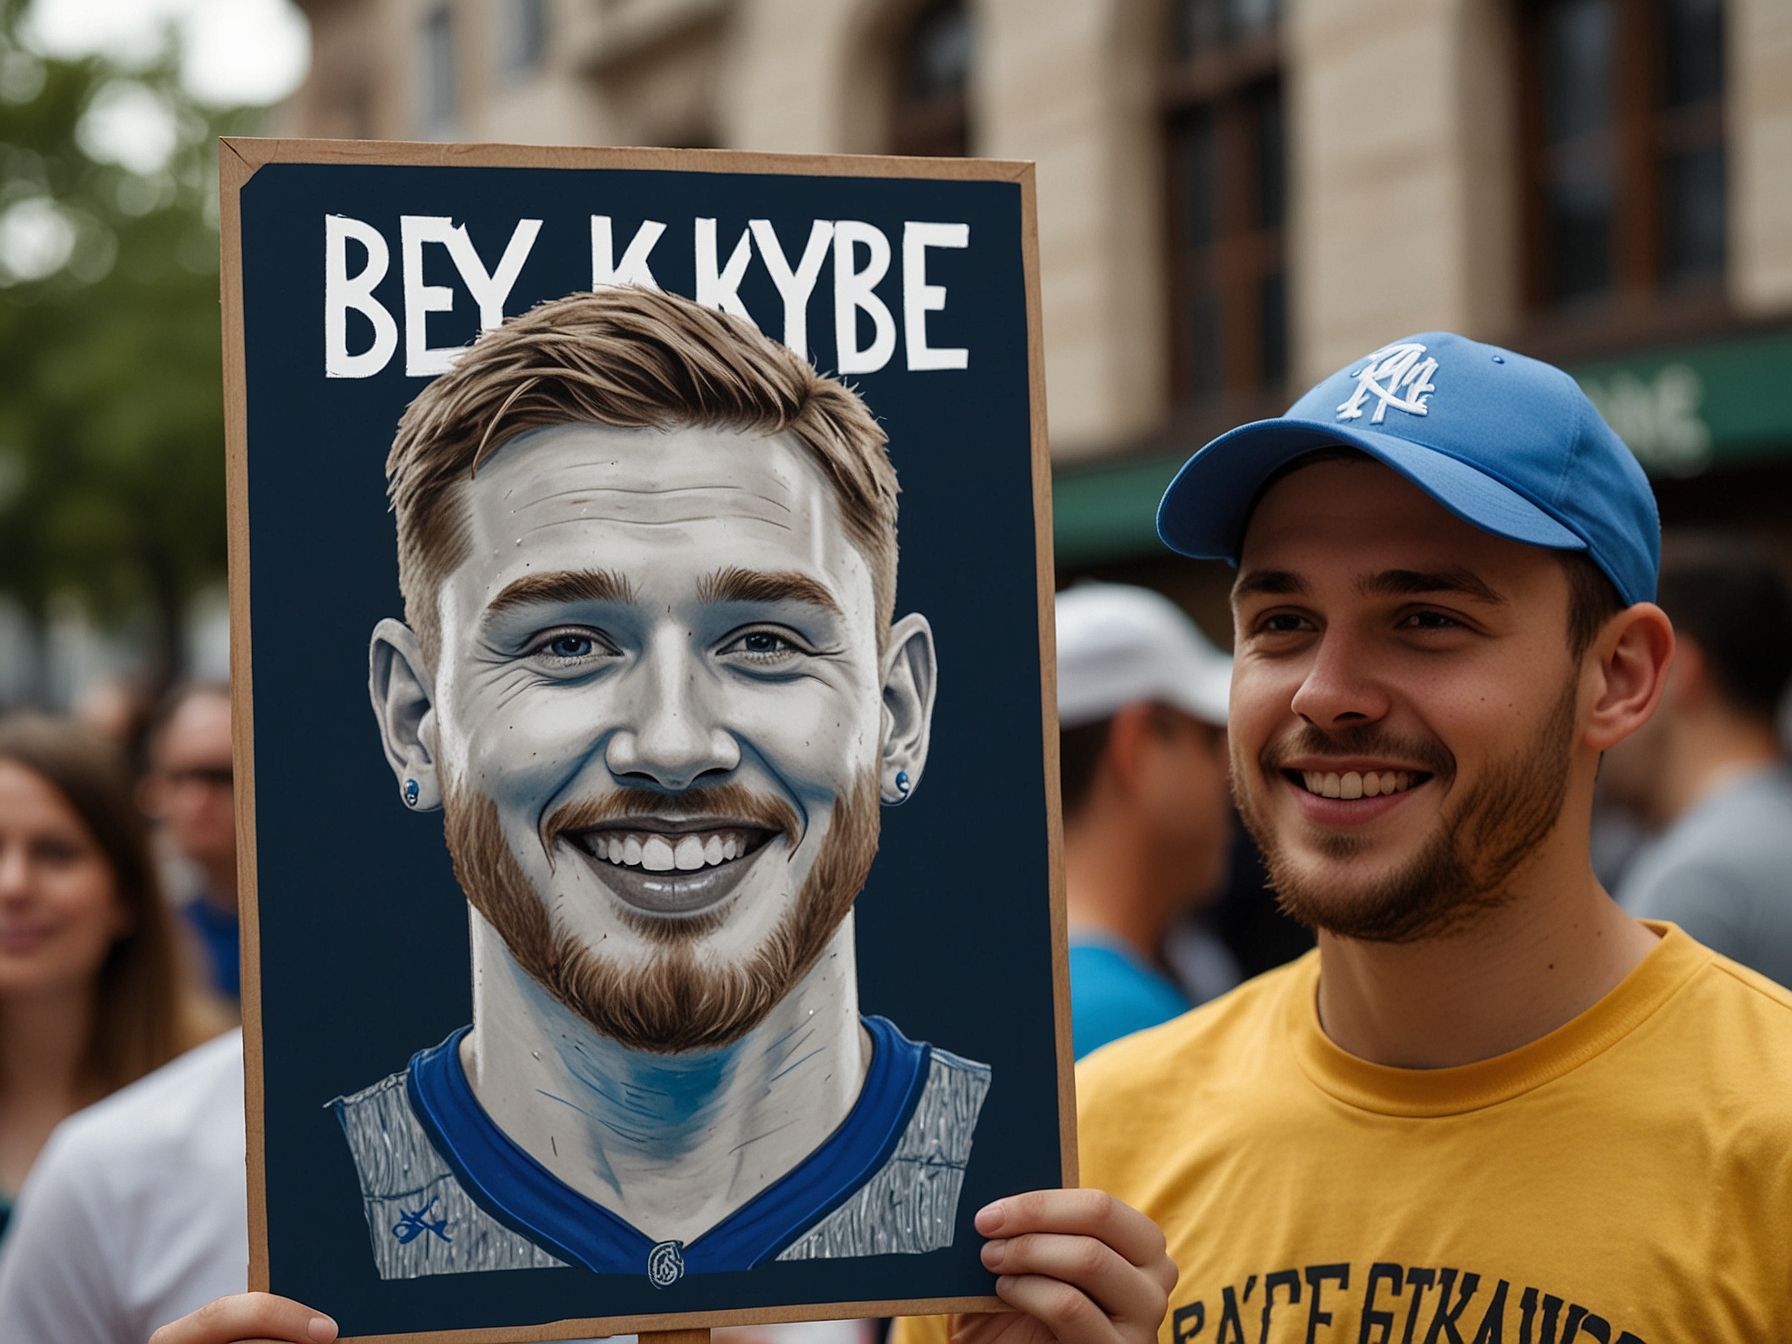 Close-up of a fan's sign reading 'Bye Bye Kyrie' and another depicting a humorous caricature of Luka Doncic, capturing the playful spirit and camaraderie of the parade.